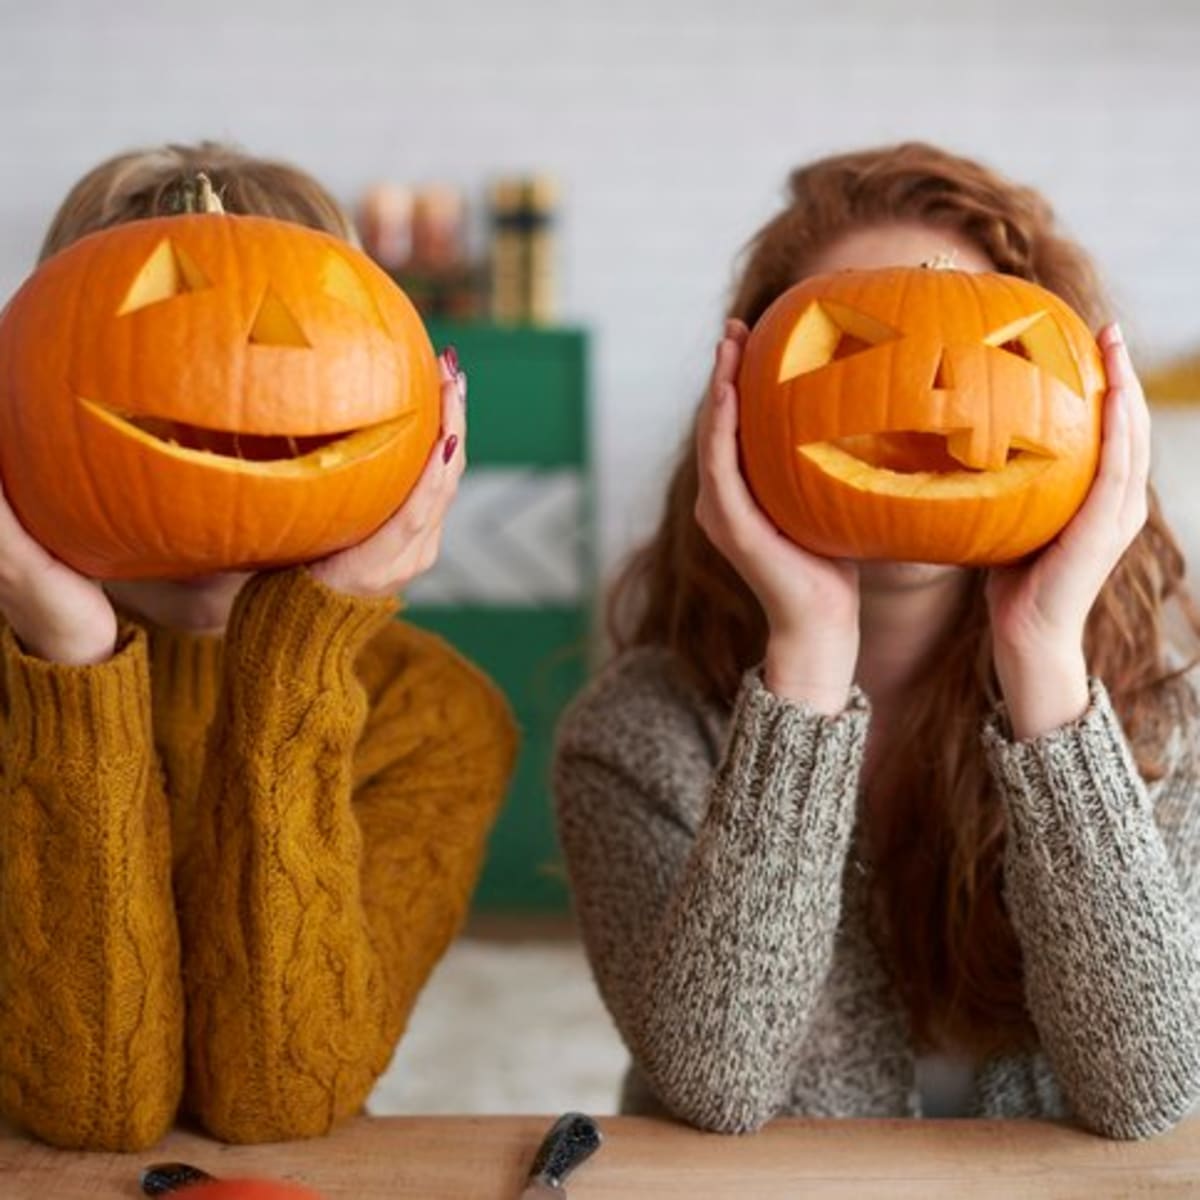 Easy pumpkin carving ideas from scary to cool